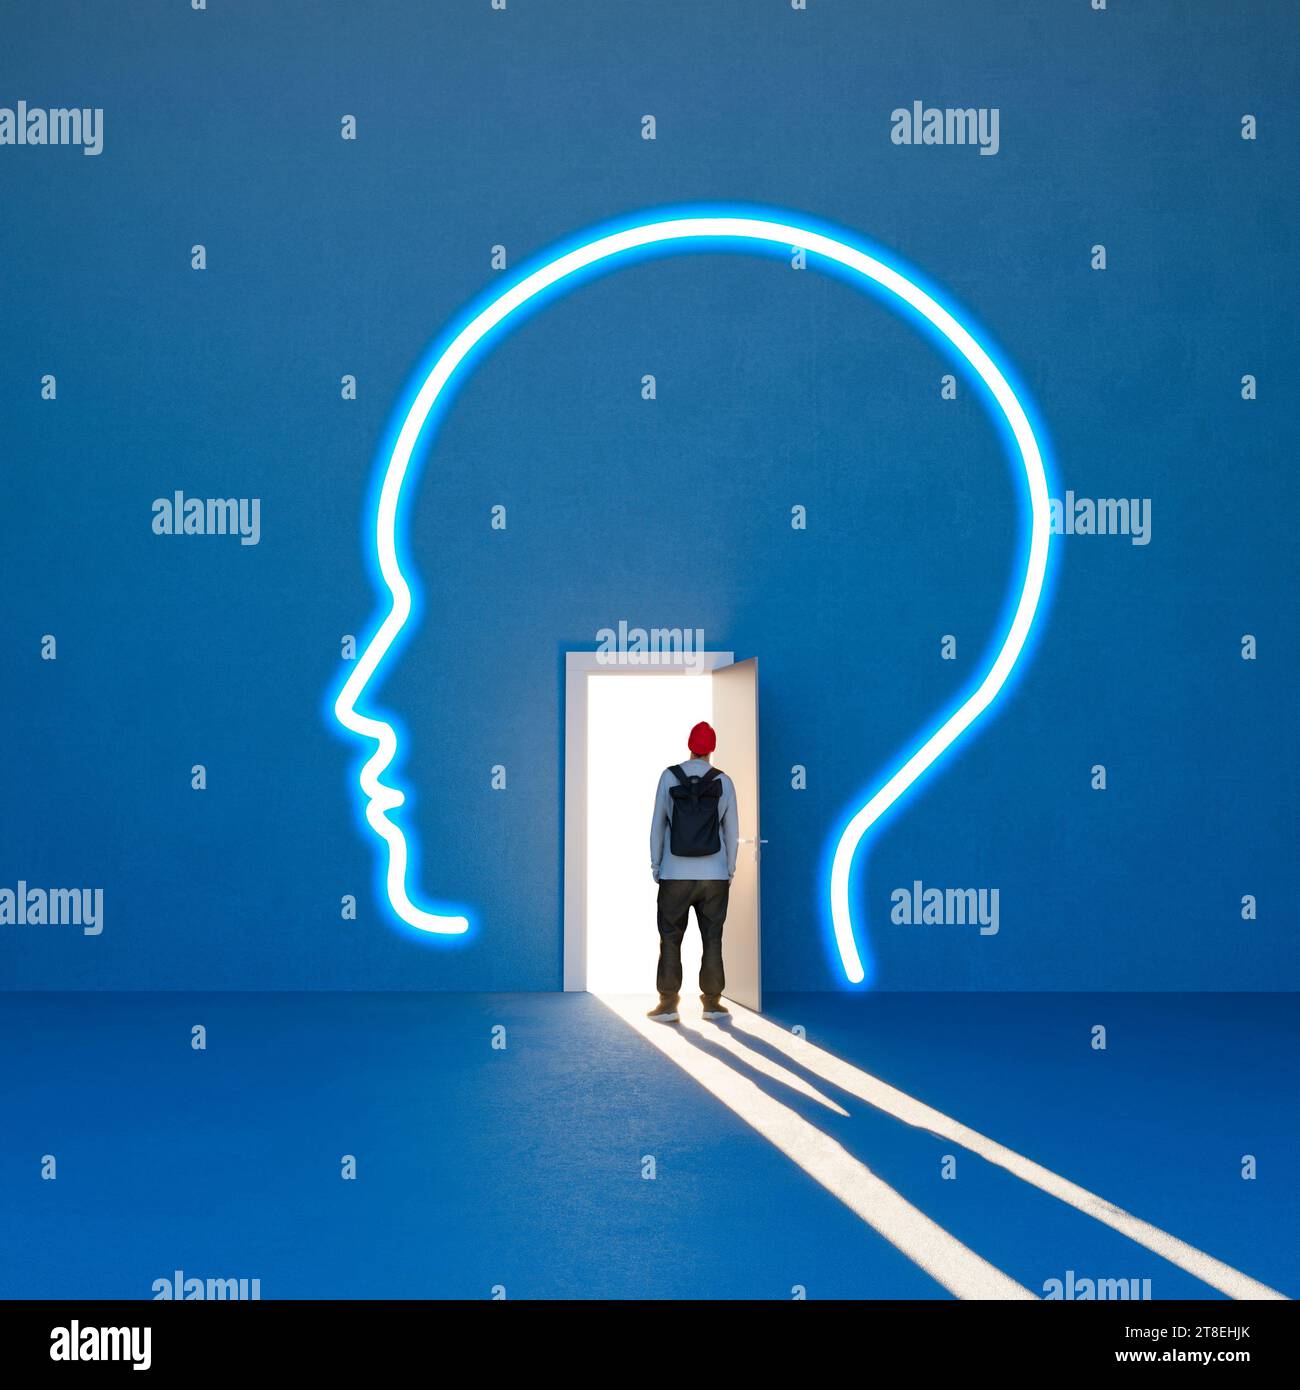 New ideas, open minded, exploration of your unconscious, study of the brain. Silhouette of a head with an open door and a man in the doorway. 3d Stock Photo